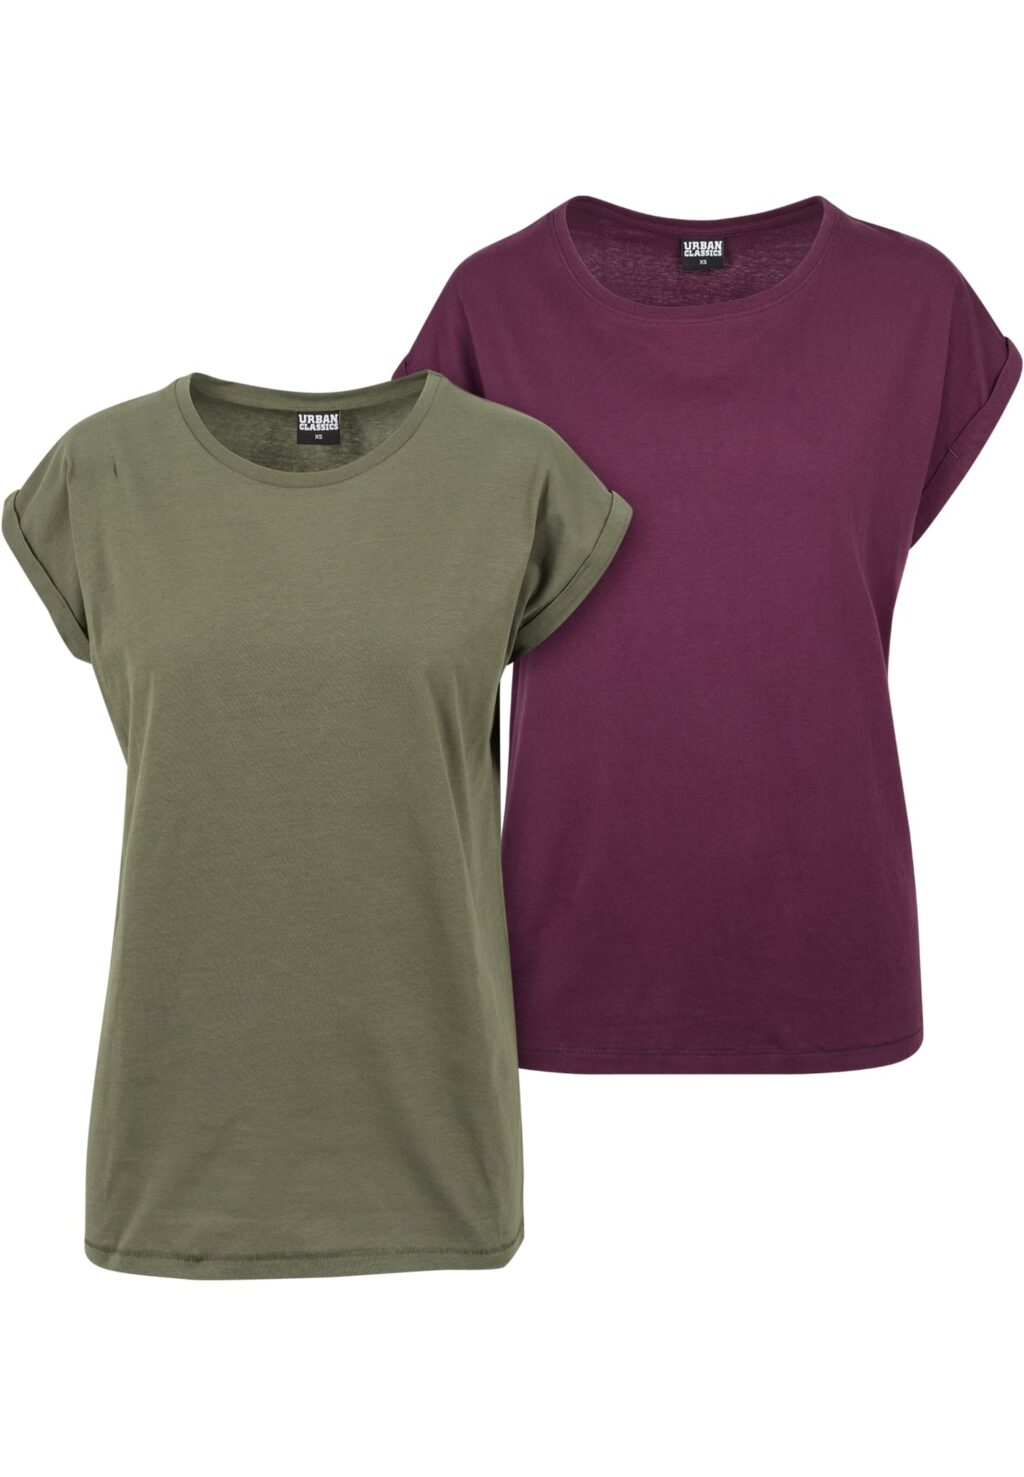 Urban Classics Ladies Extended Shoulder Tee 2-Pack olive/cherry AZ771